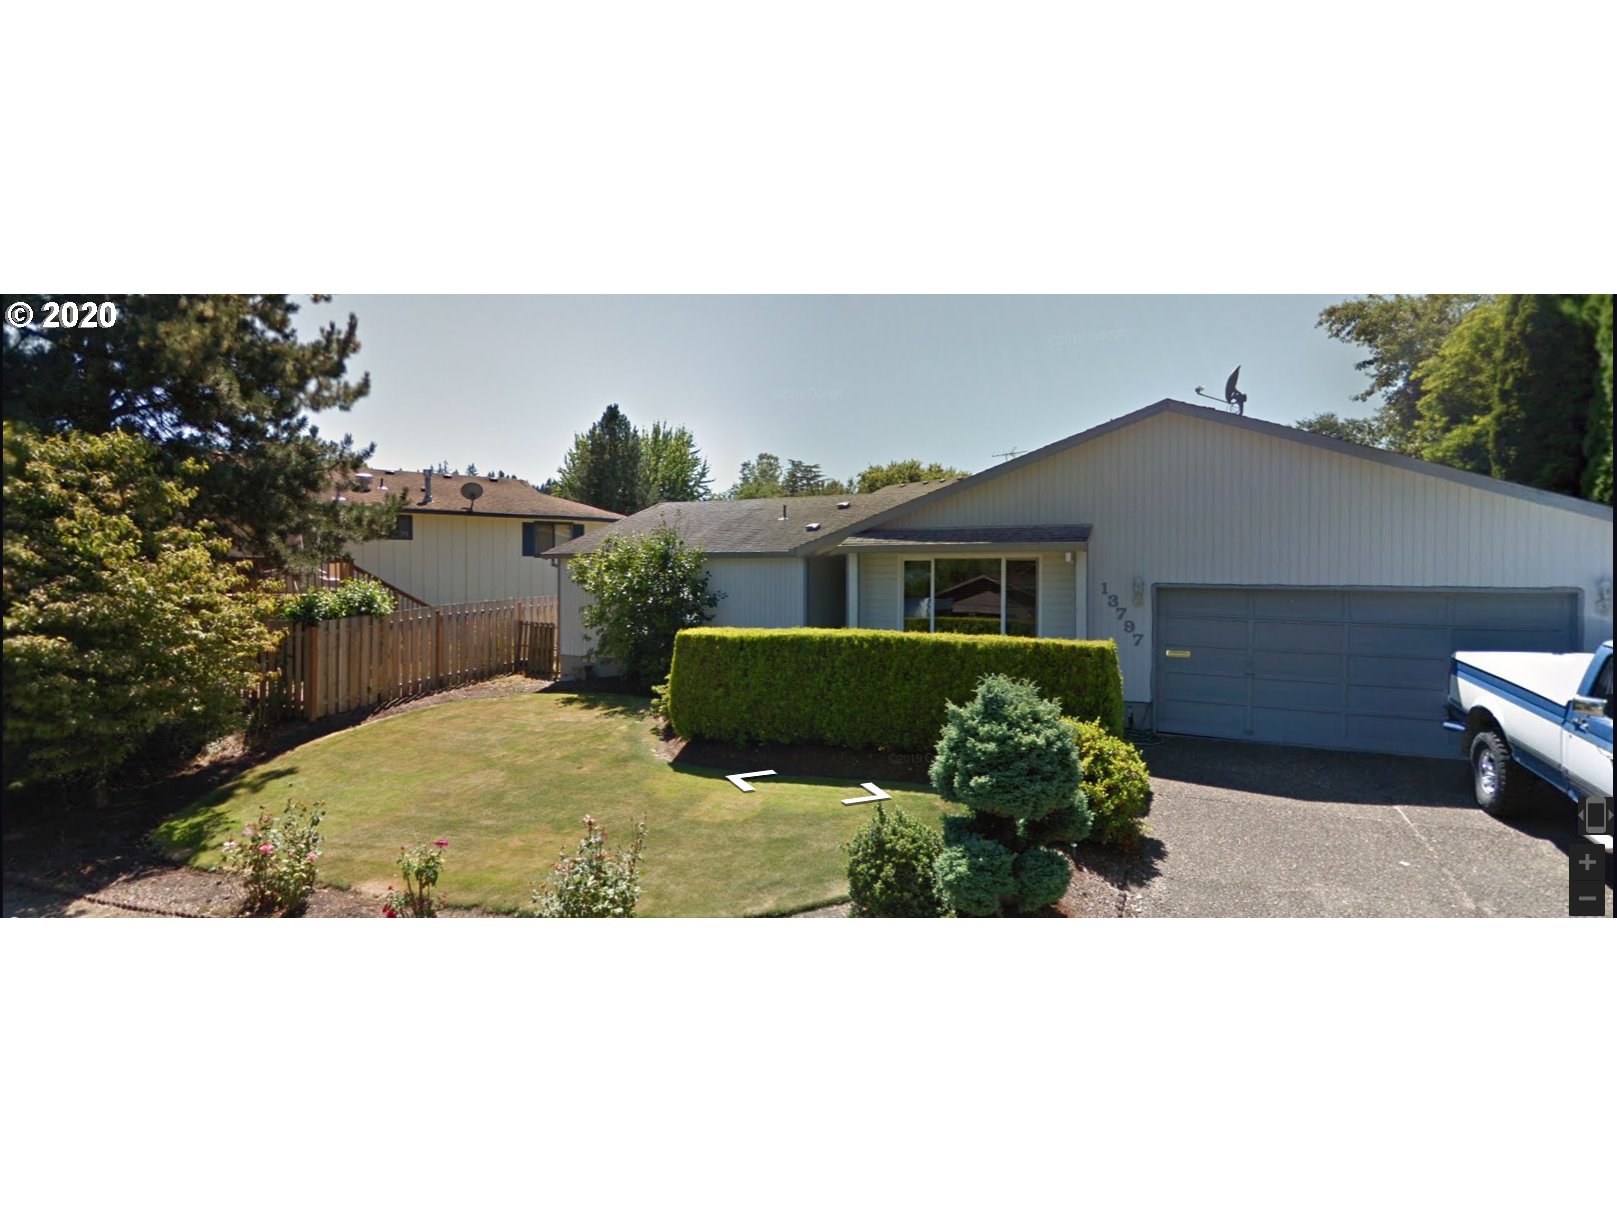 13797 SE 115TH AVE (1 of 1)